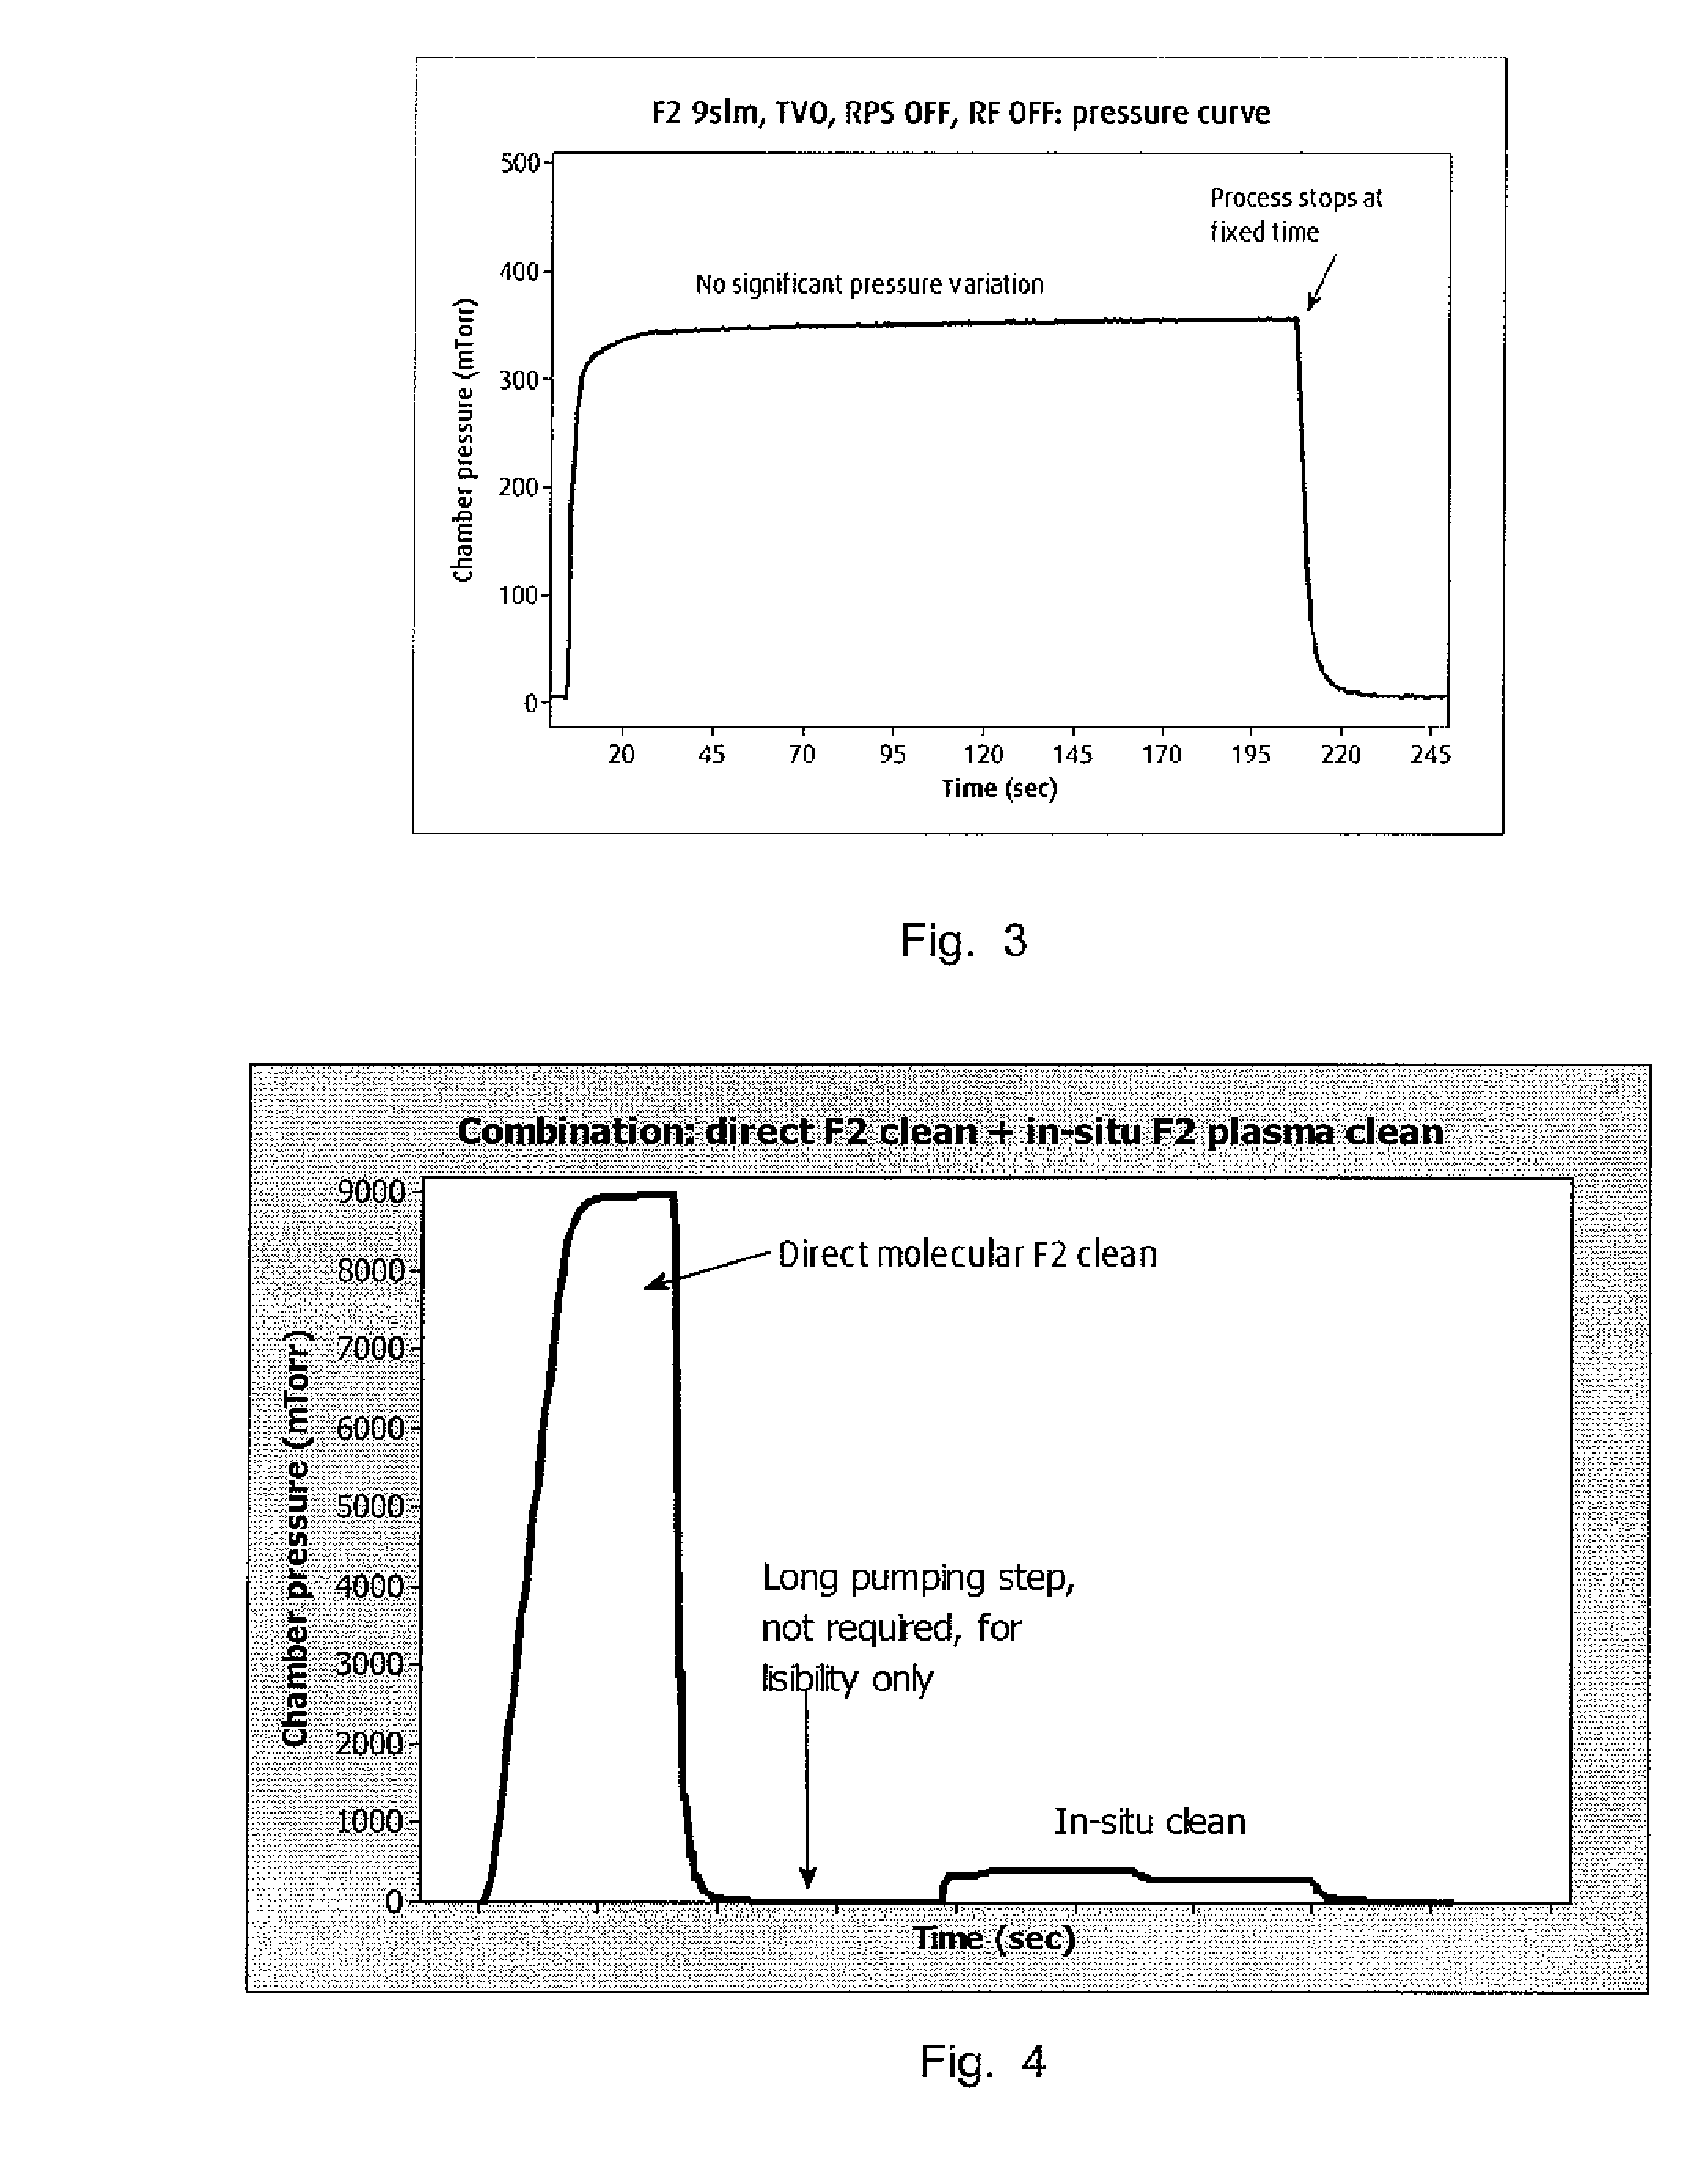 Chemical vapor deposition chamber cleaning with molecular fluorine